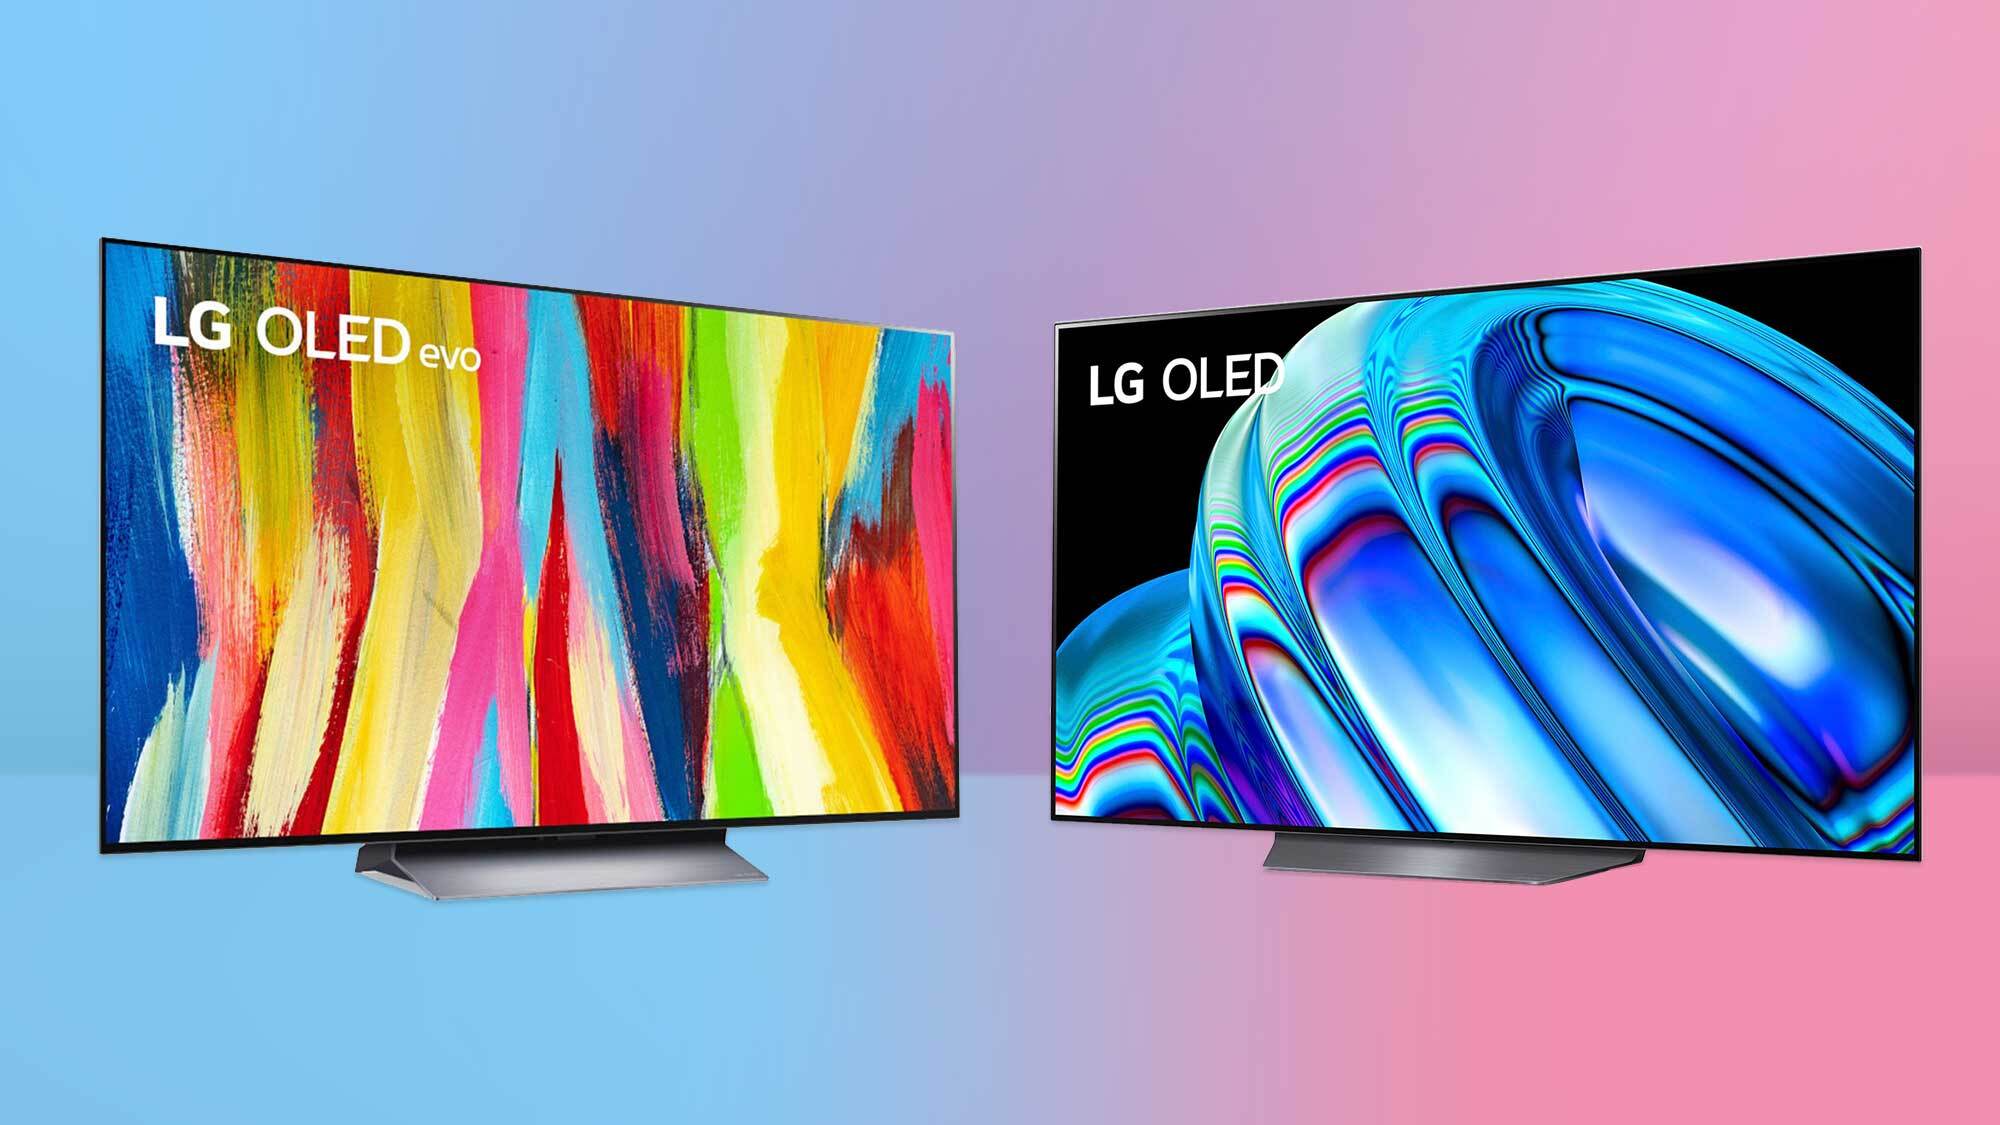 Lg 65 oled 4k smart tv • Compare & see prices now »